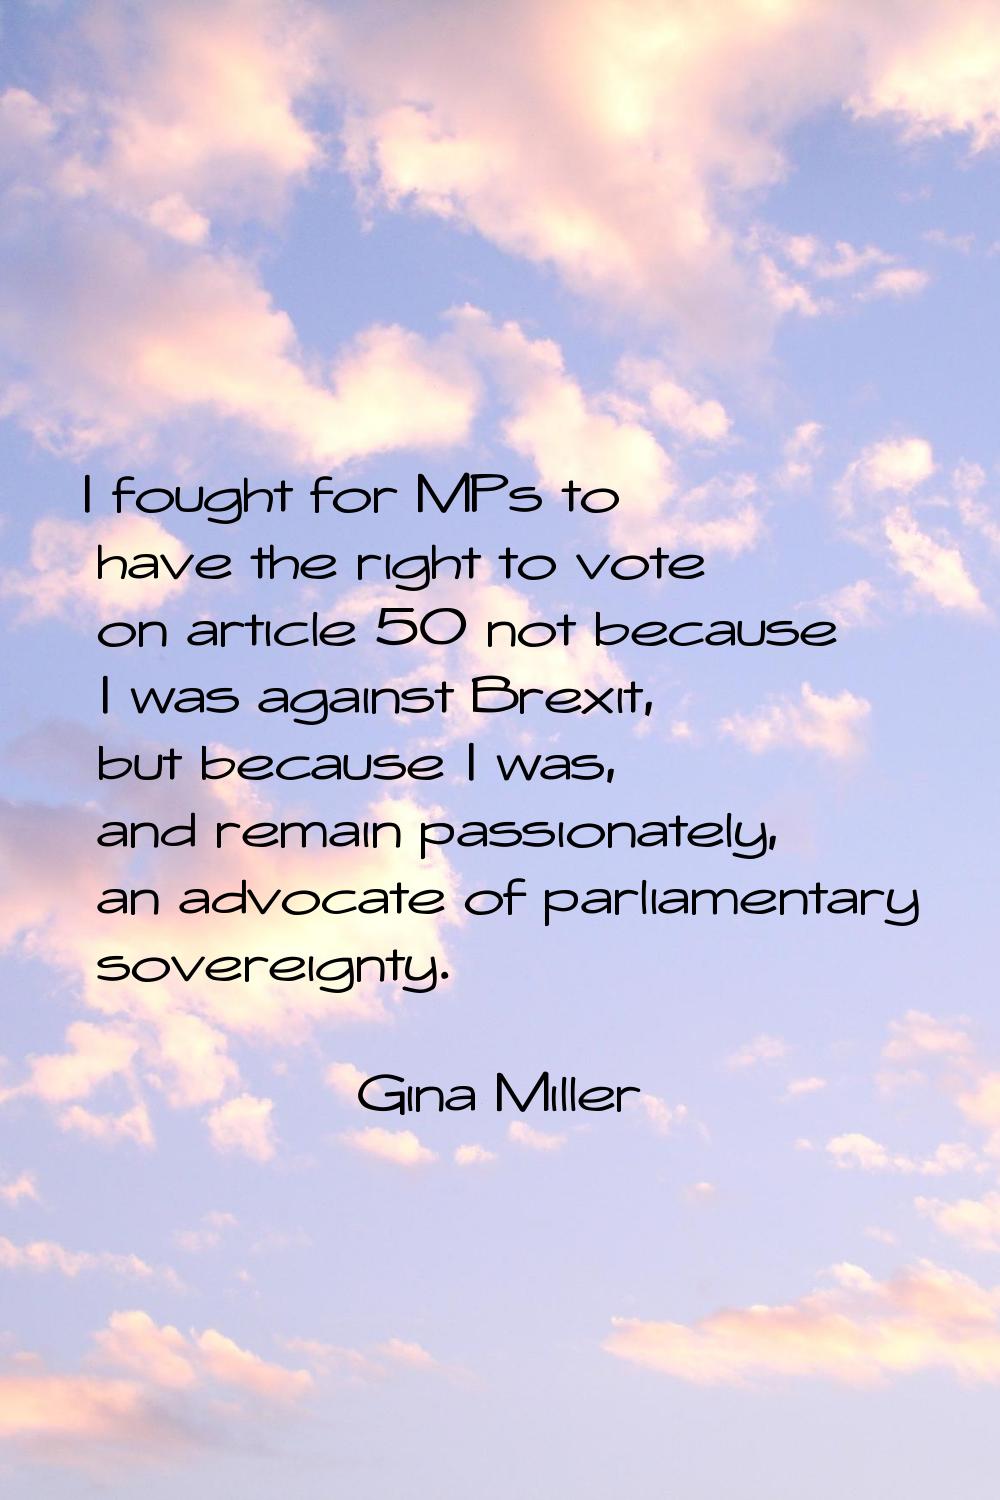 I fought for MPs to have the right to vote on article 50 not because I was against Brexit, but beca